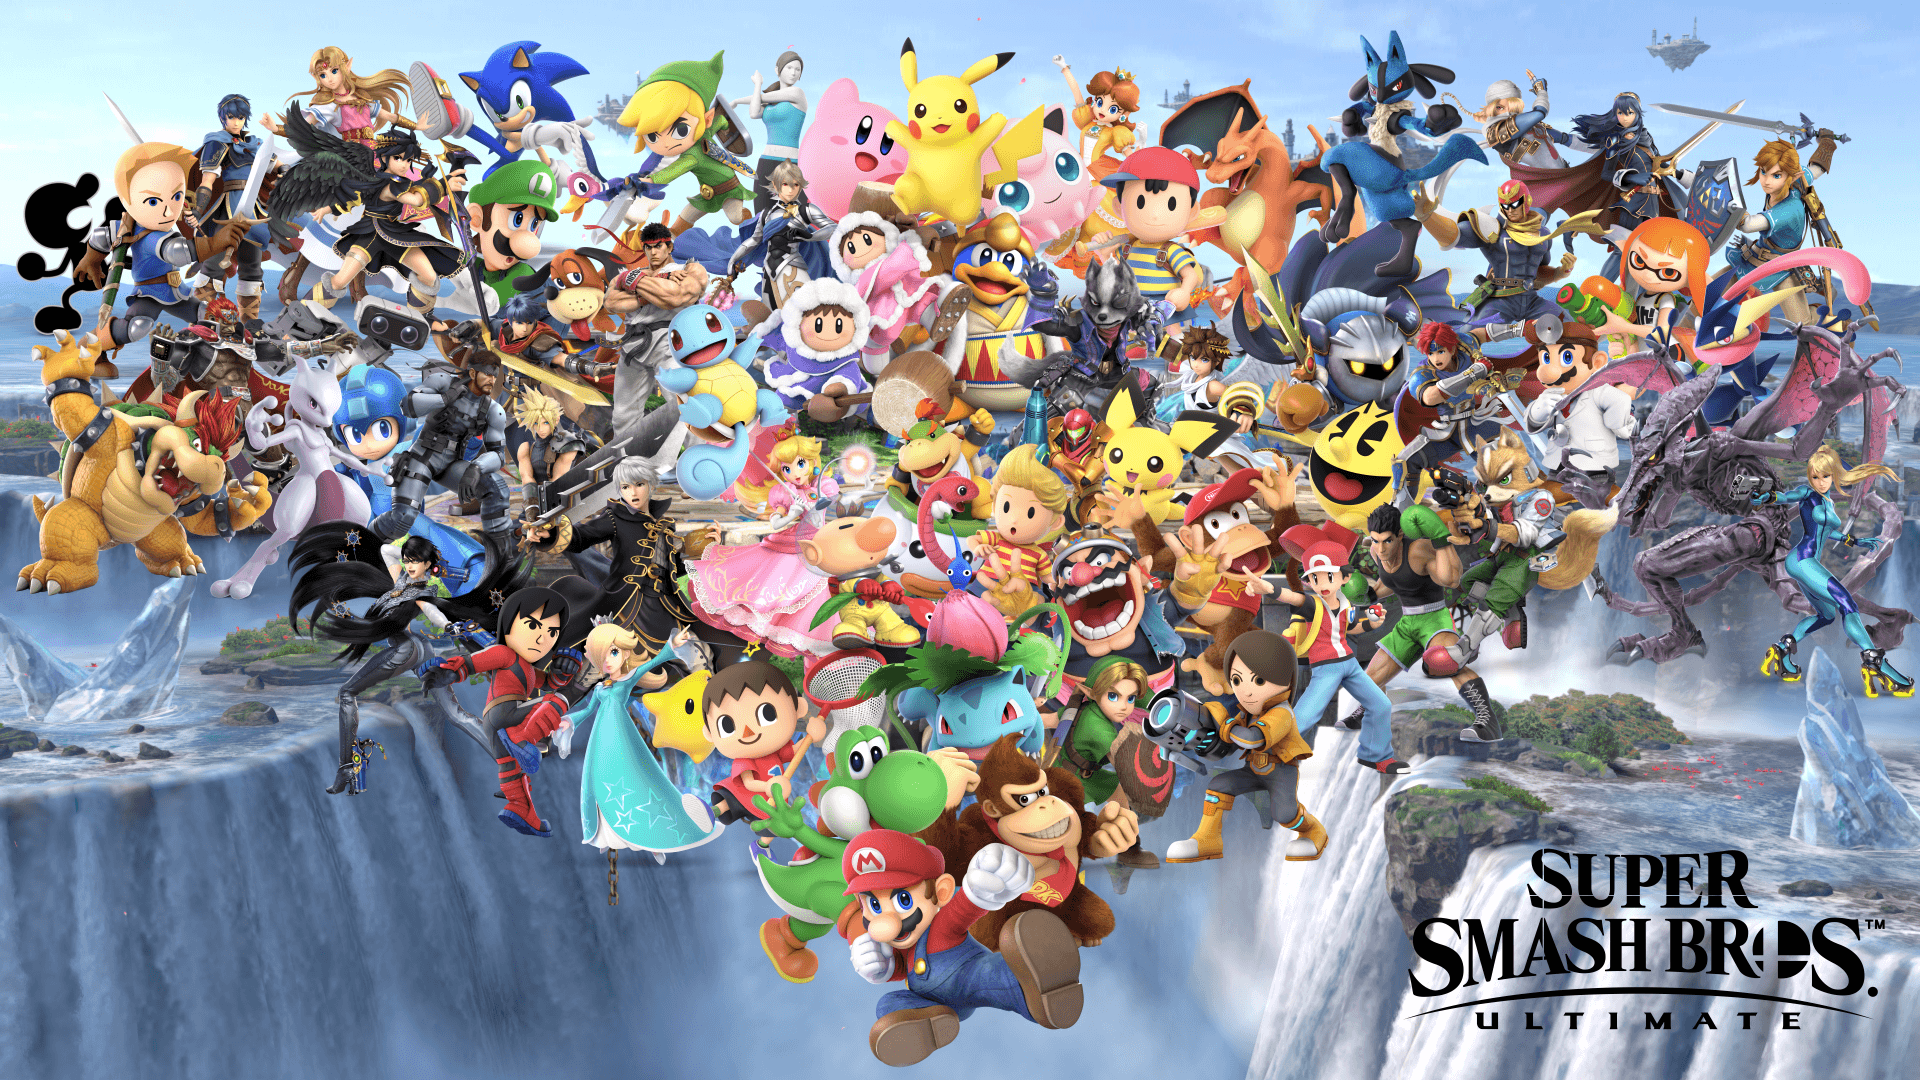 82-Person Smash Bash Viewer’s Tournament in May 2022